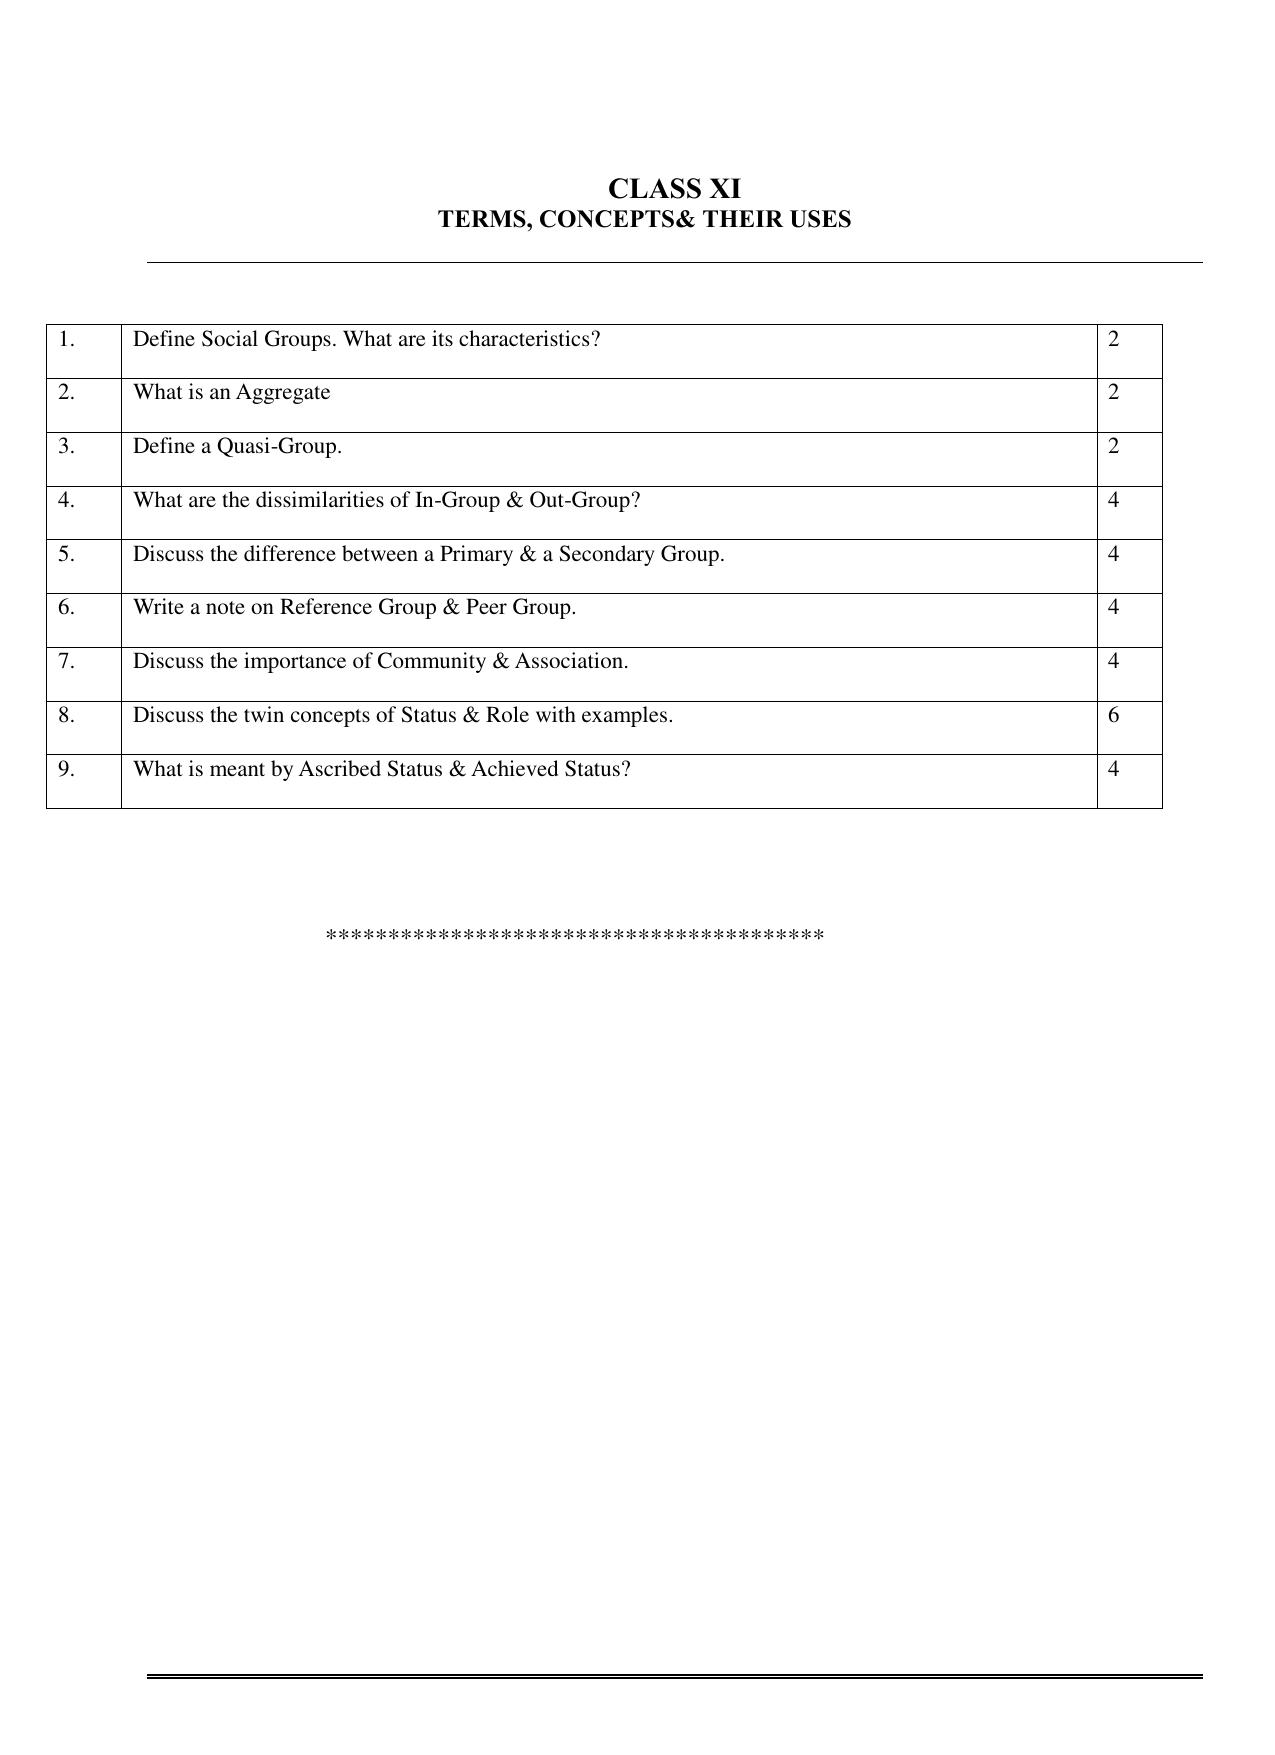 CBSE Worksheets for Class 11 Sociology Terms Concepts and Uses Assignment 2 - Page 1